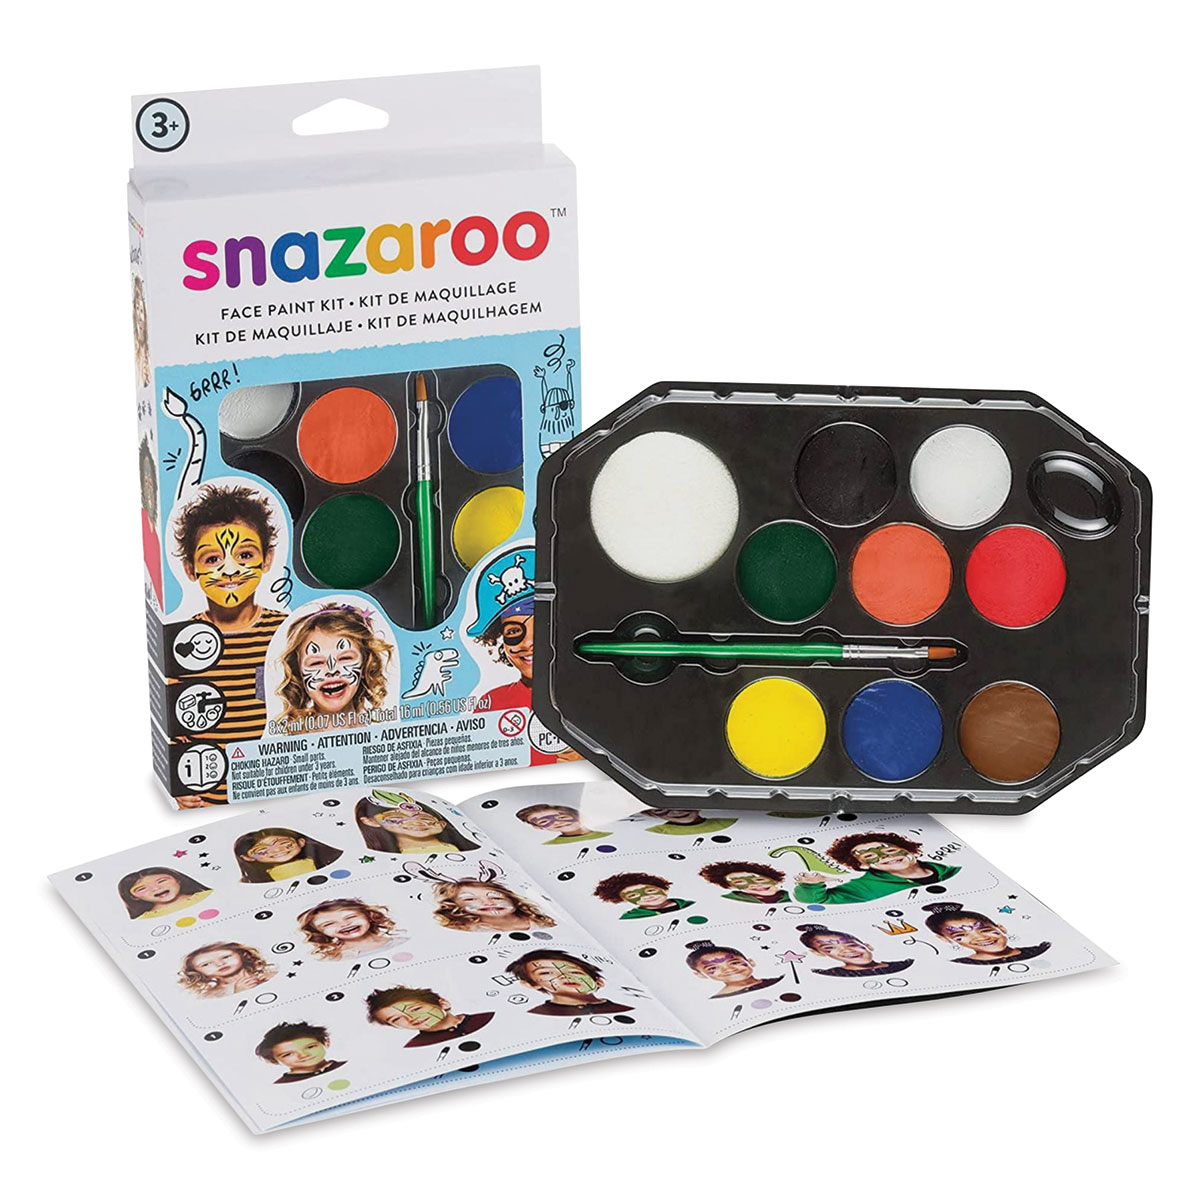 SNAZAROO Face Paint Palette 8 Colors Brand New Sealed